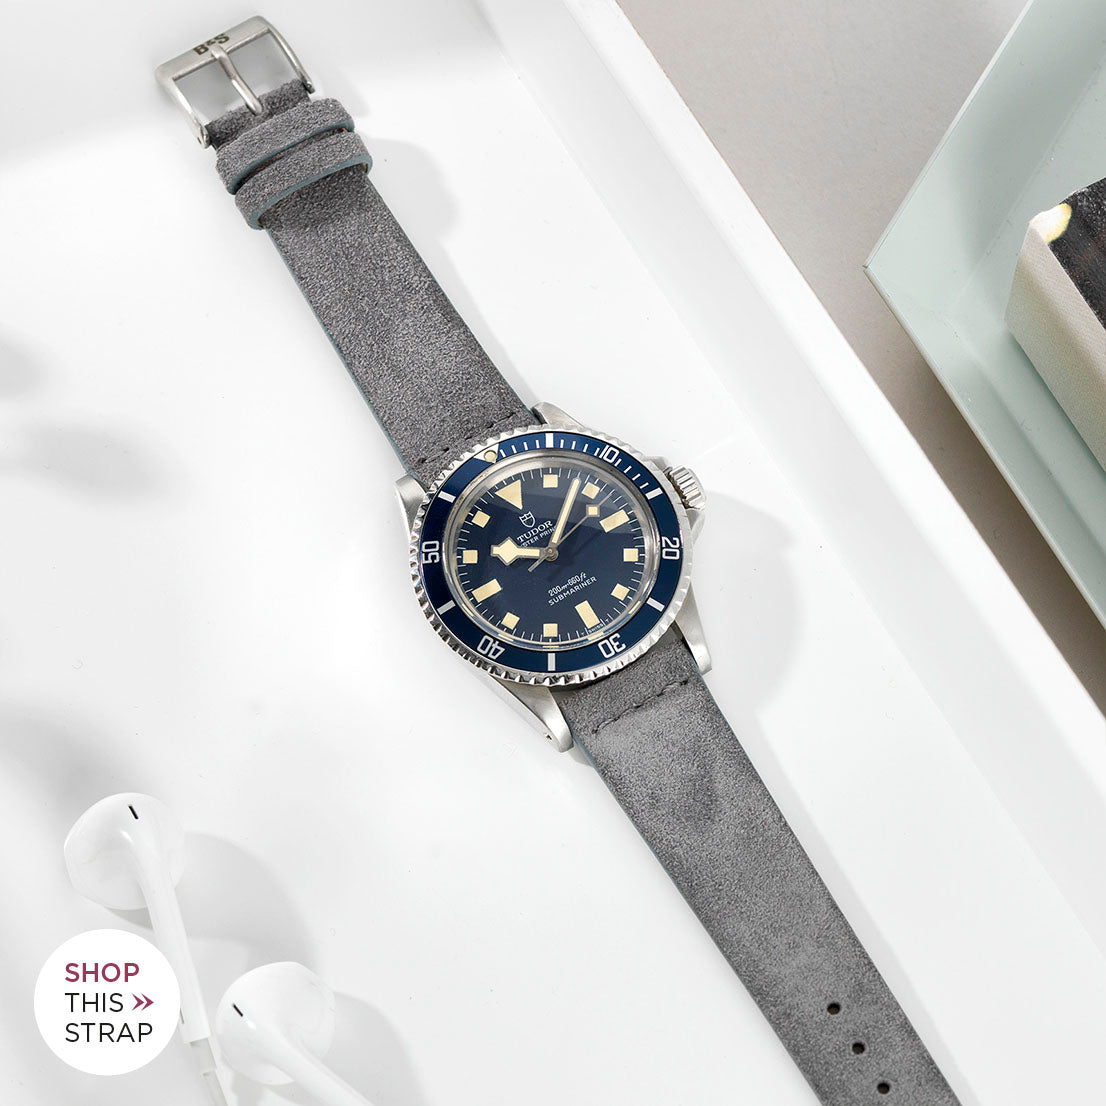 Bulang and Sons_Strap Guide_The Tudor Blue Snowflake_Grey Silky Suede Leather Watch Strap